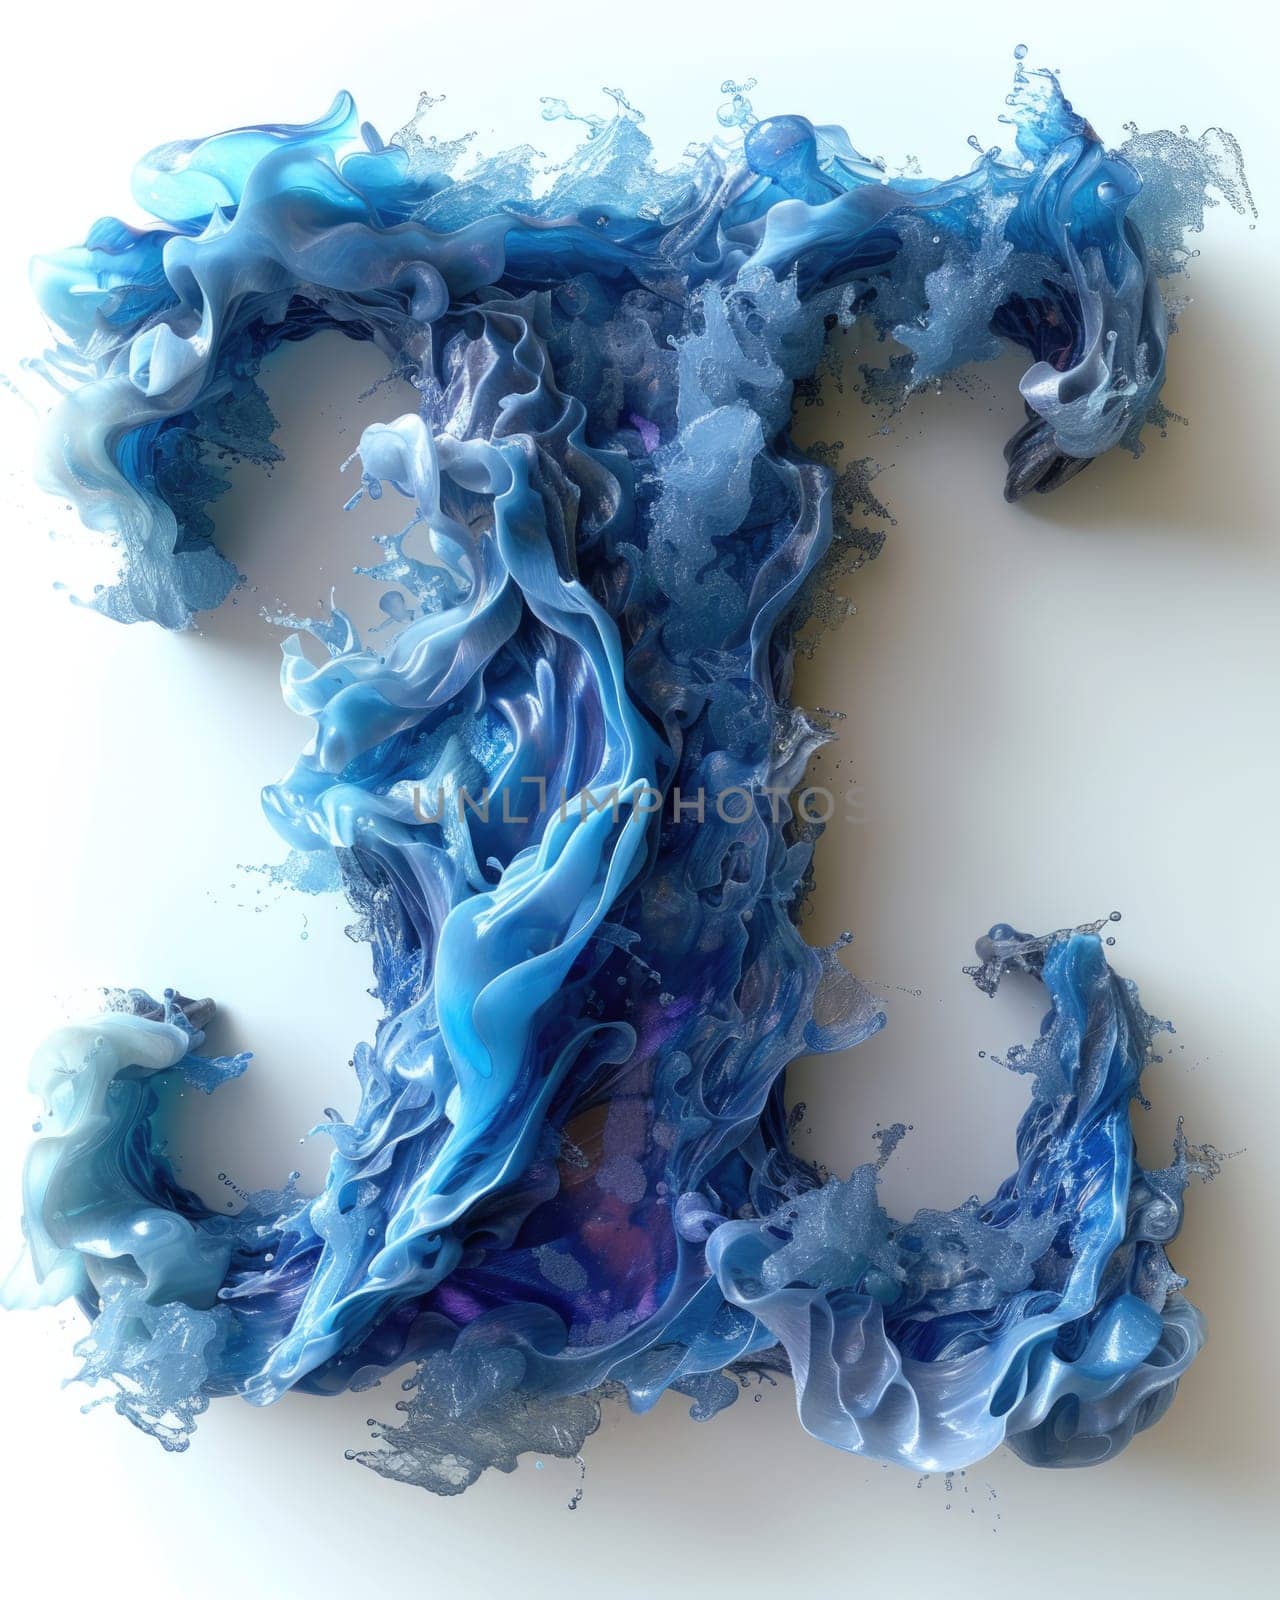 A photograph showcasing the letter F formed by blue and white paint on the surface of the sea.